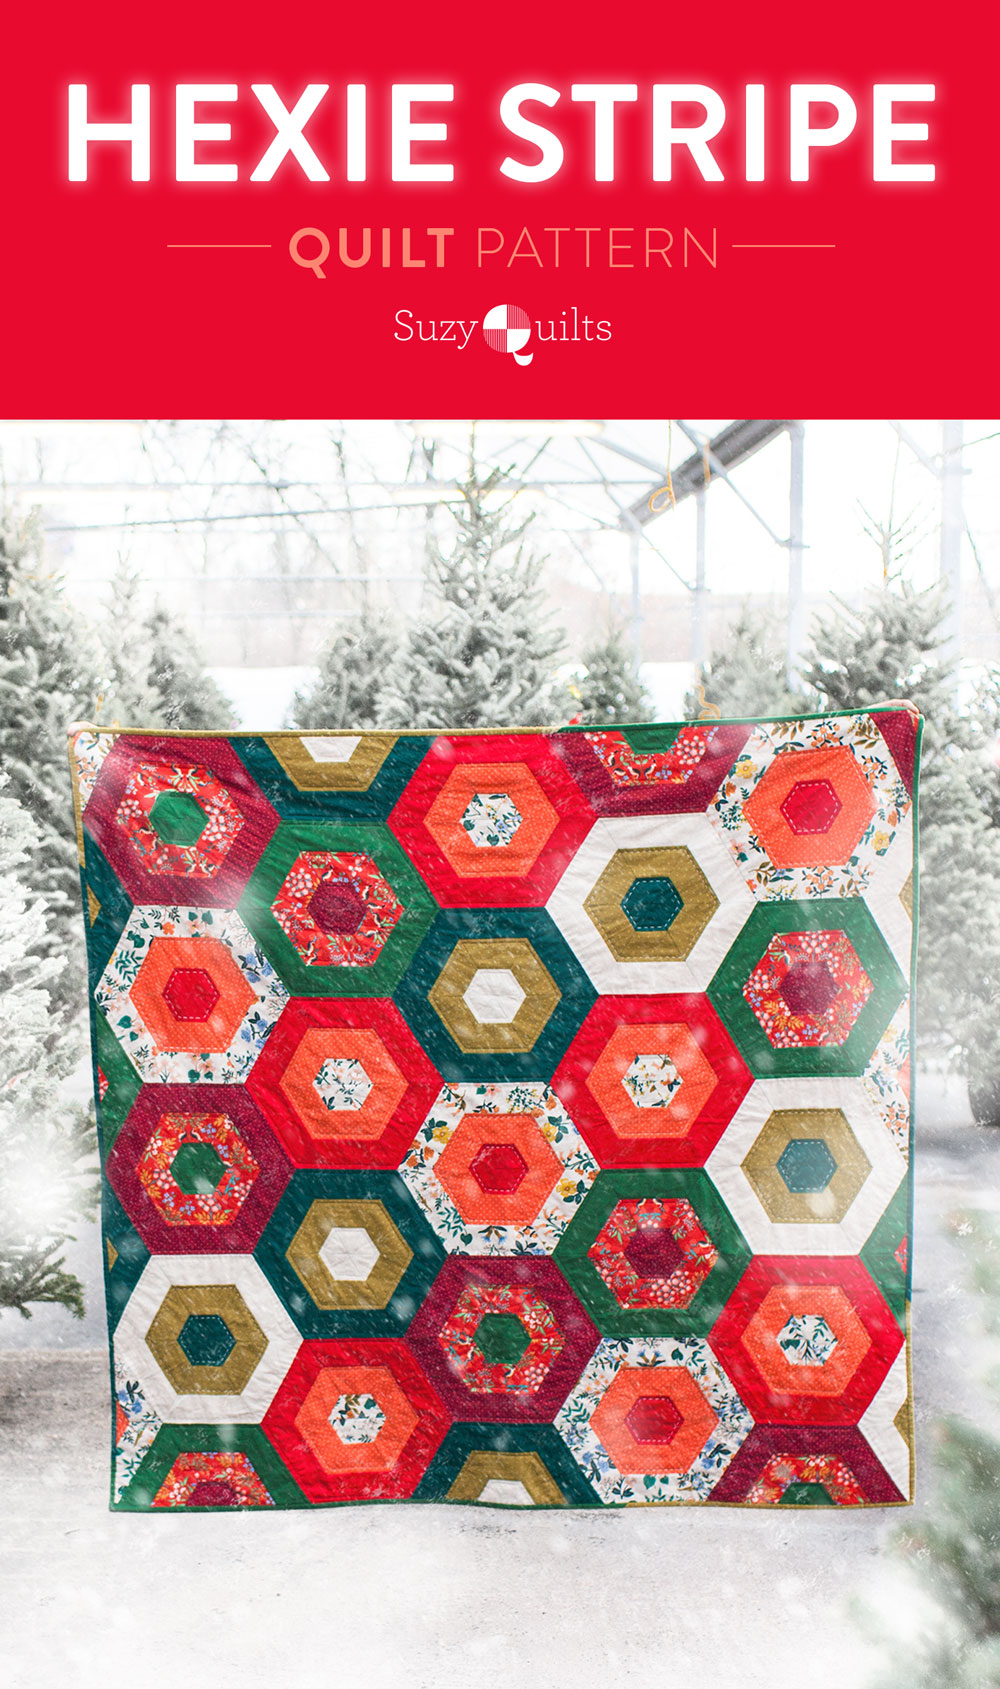 It's easy to get in the holiday spirit and get your Christmas quilting done with a pattern like Hexie Stripe. It's a vintage design with a modern twist! To make a throw all you need are 9 different 1/2 yd. cuts of fabric. Mix red and green solids with some floral prints for a beautifully festive quilt! suzyquilts.com #christmasquilt #handmadechristmas